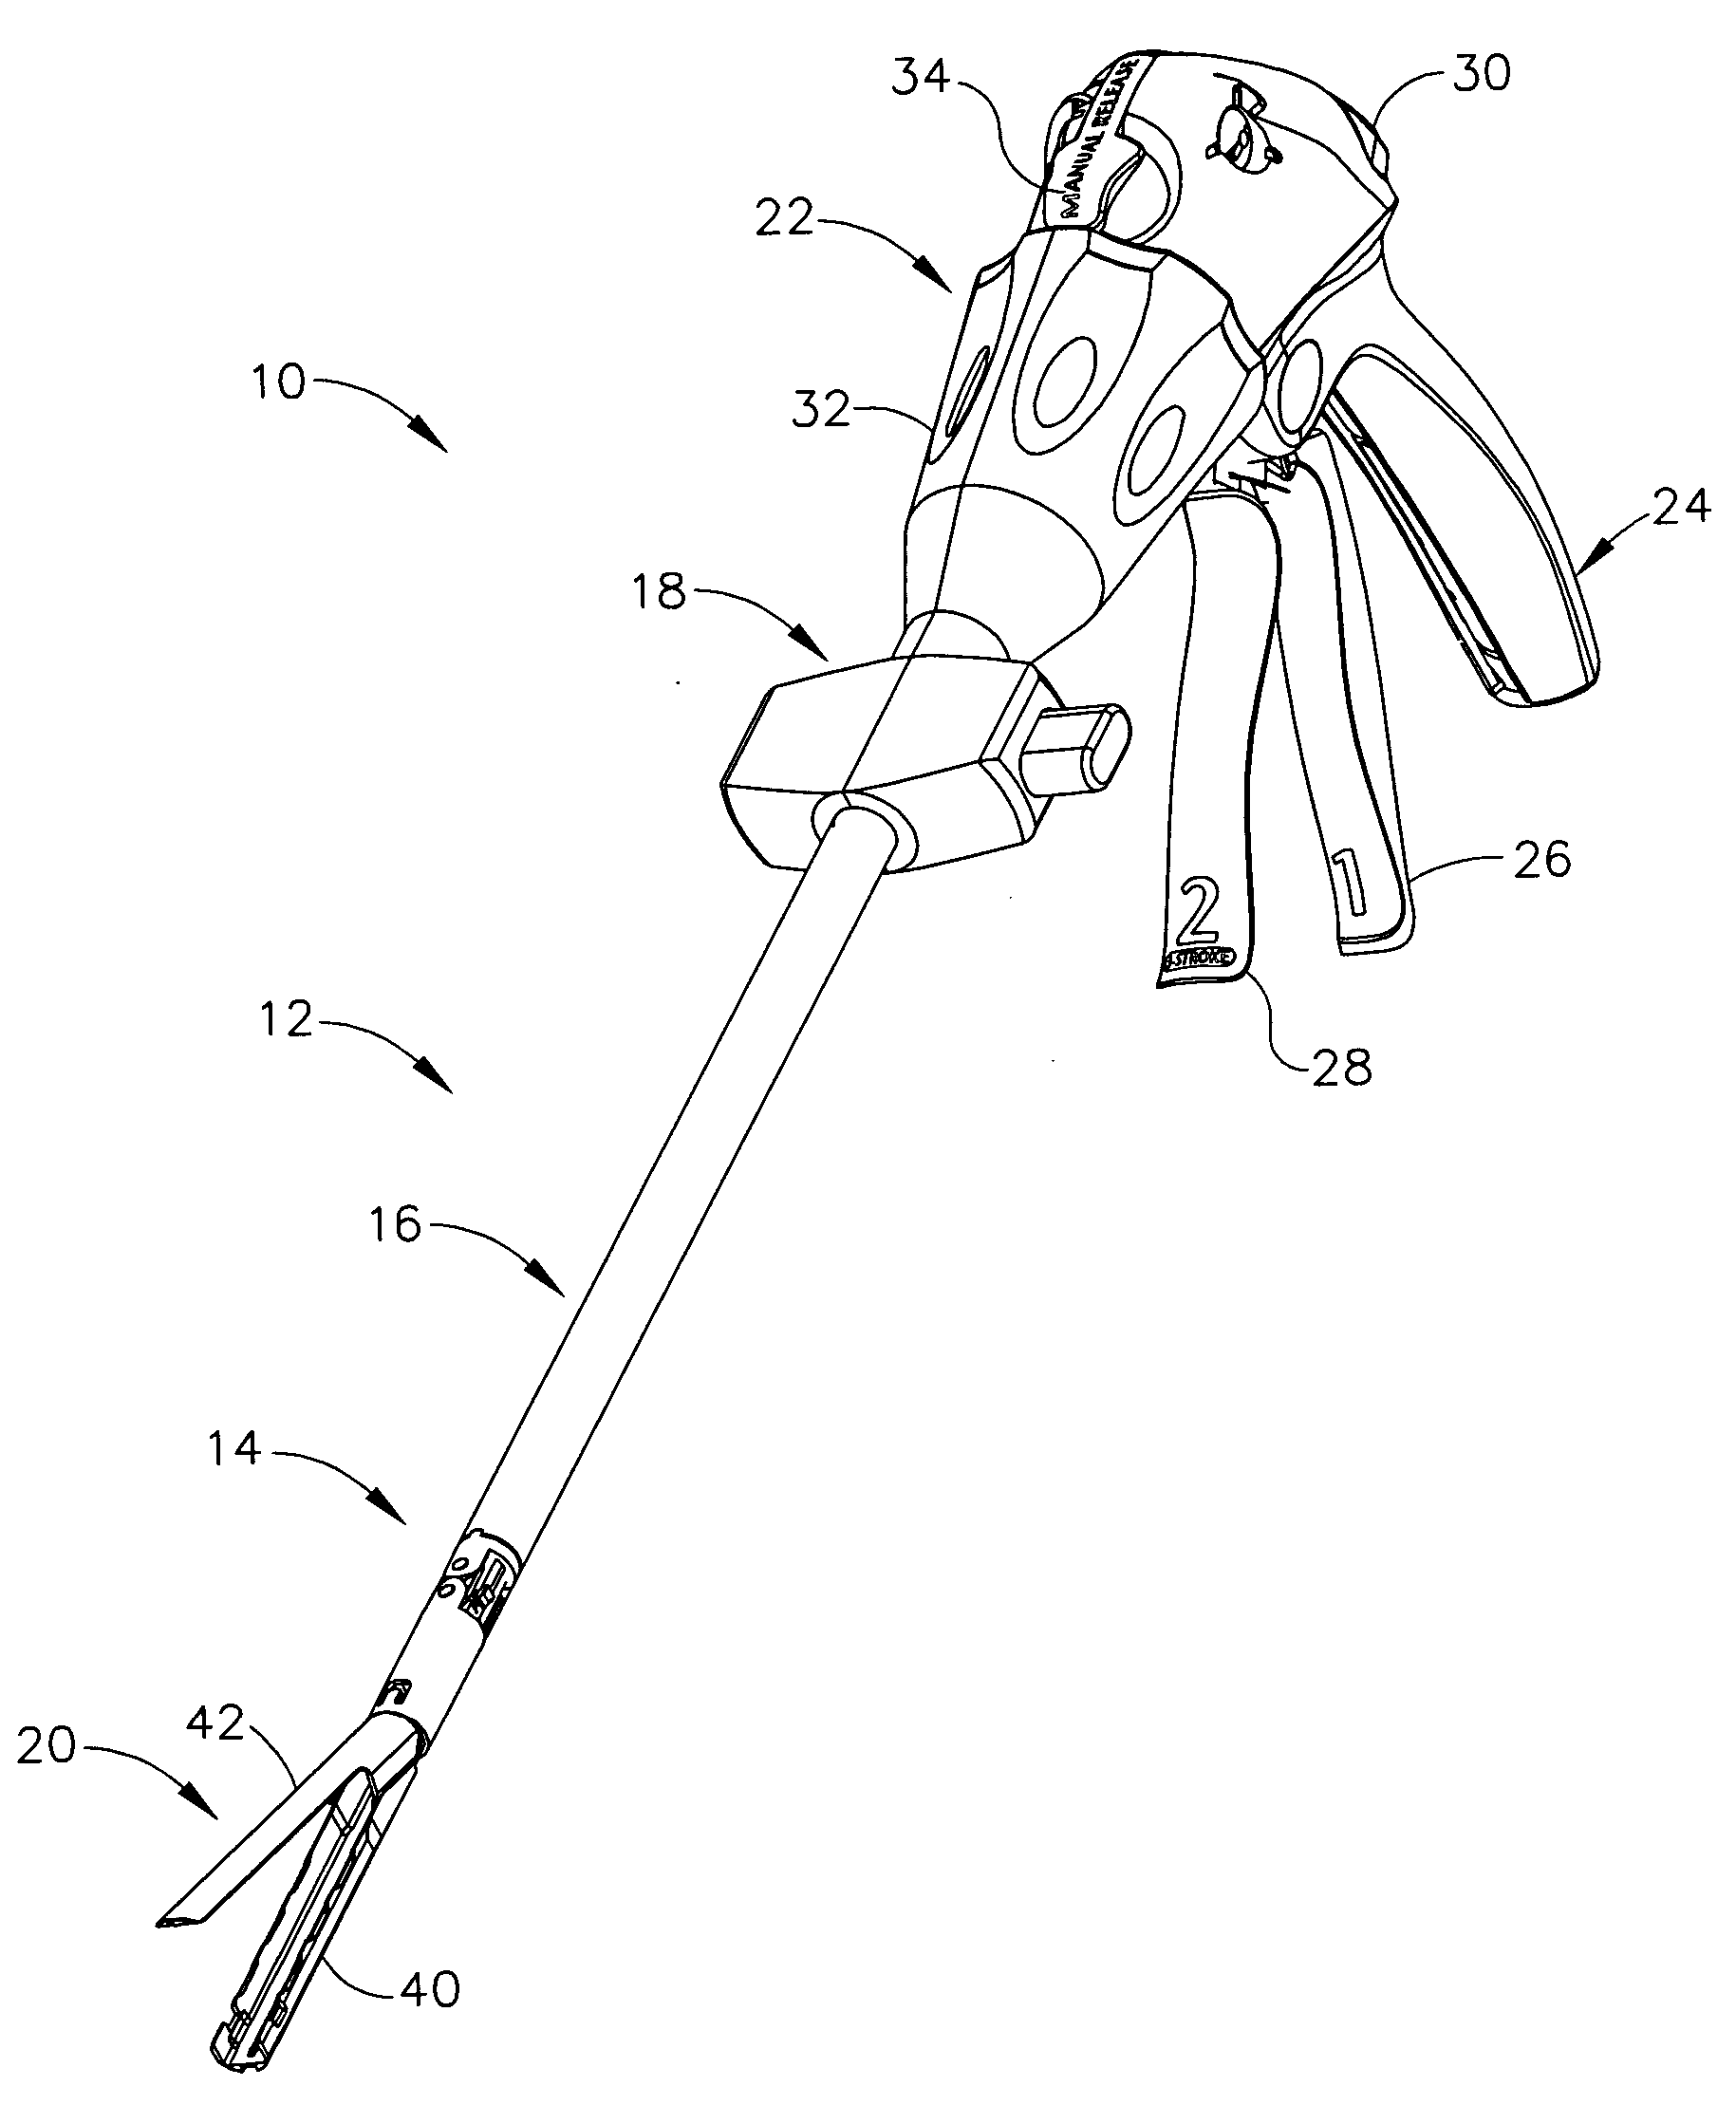 Surgical instrument with an articulating shaft locking mechanism